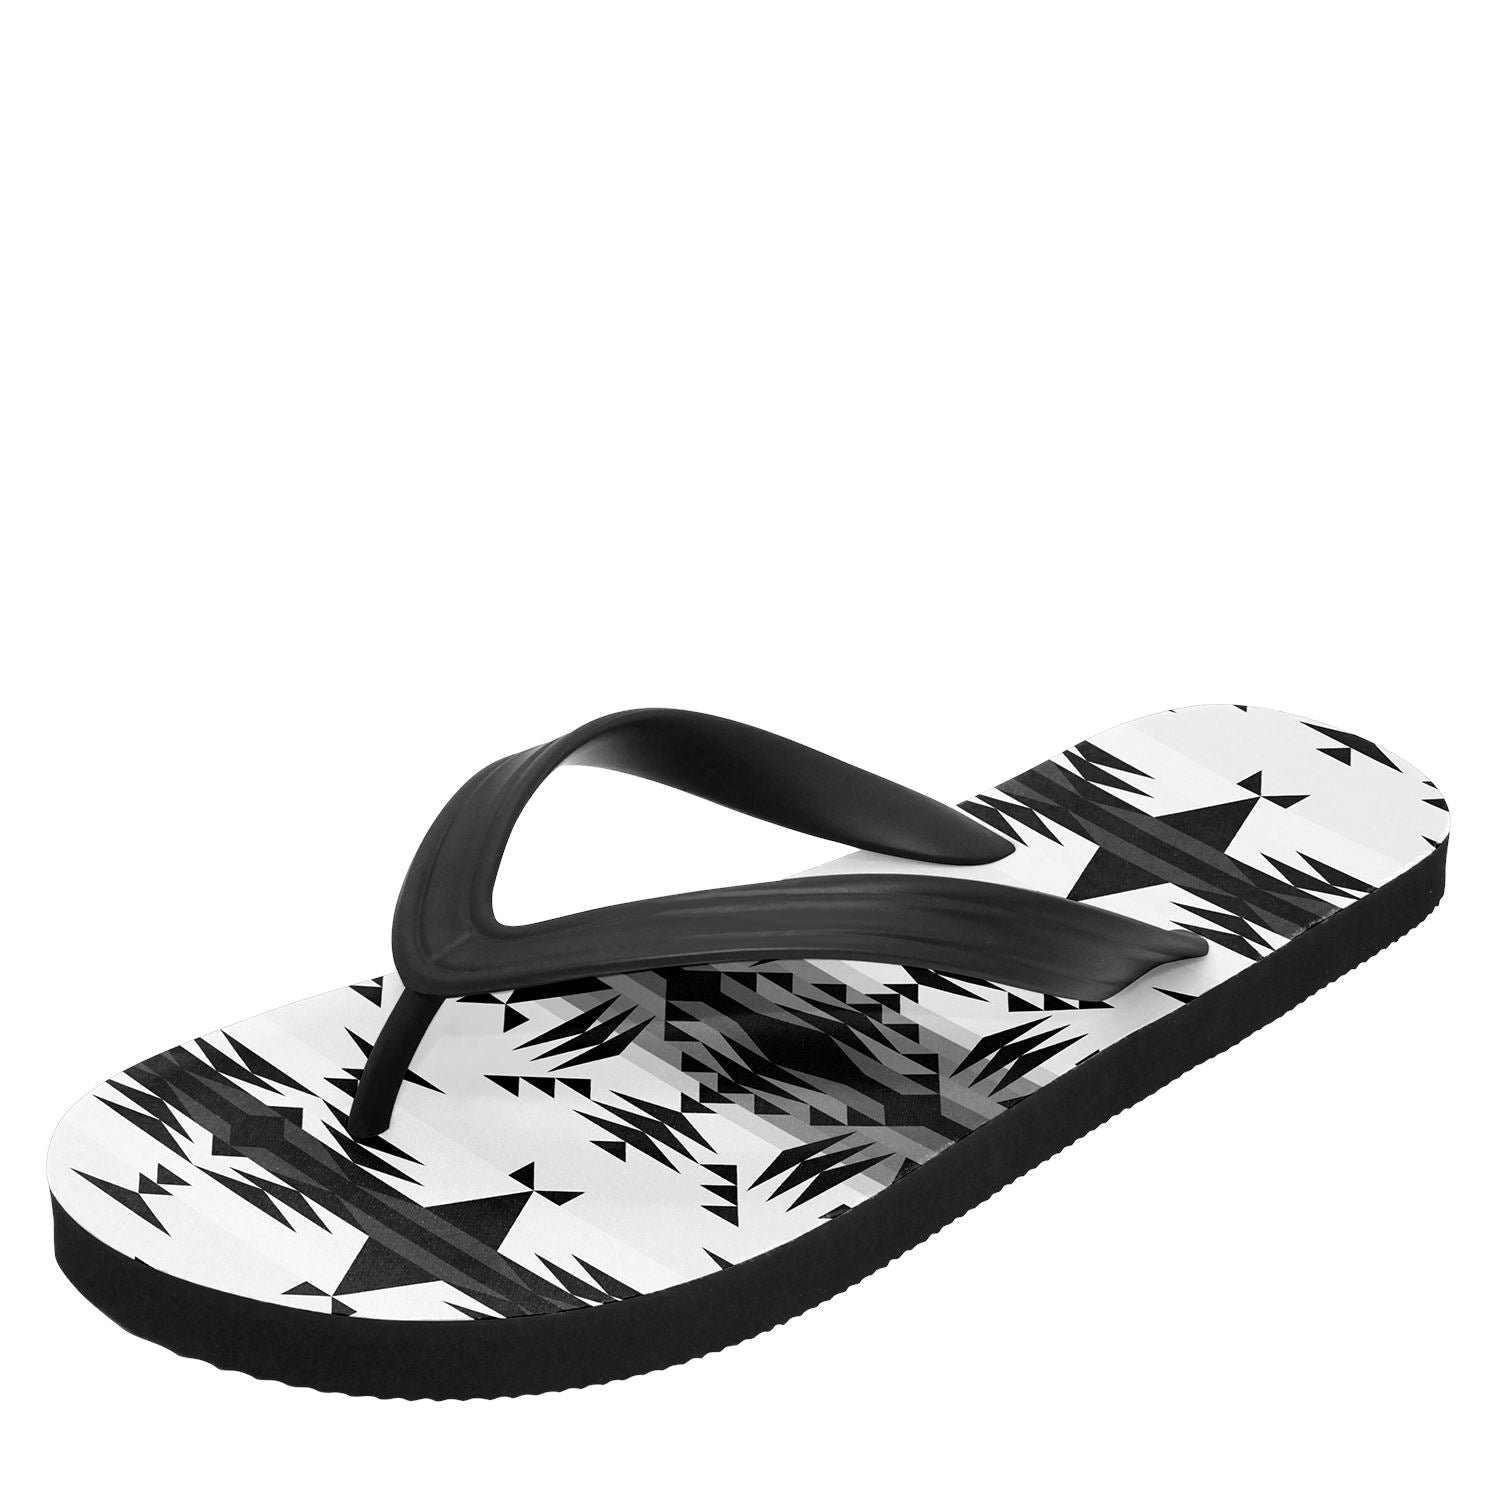 Between the Mountains White and Black Flip Flops 49 Dzine 